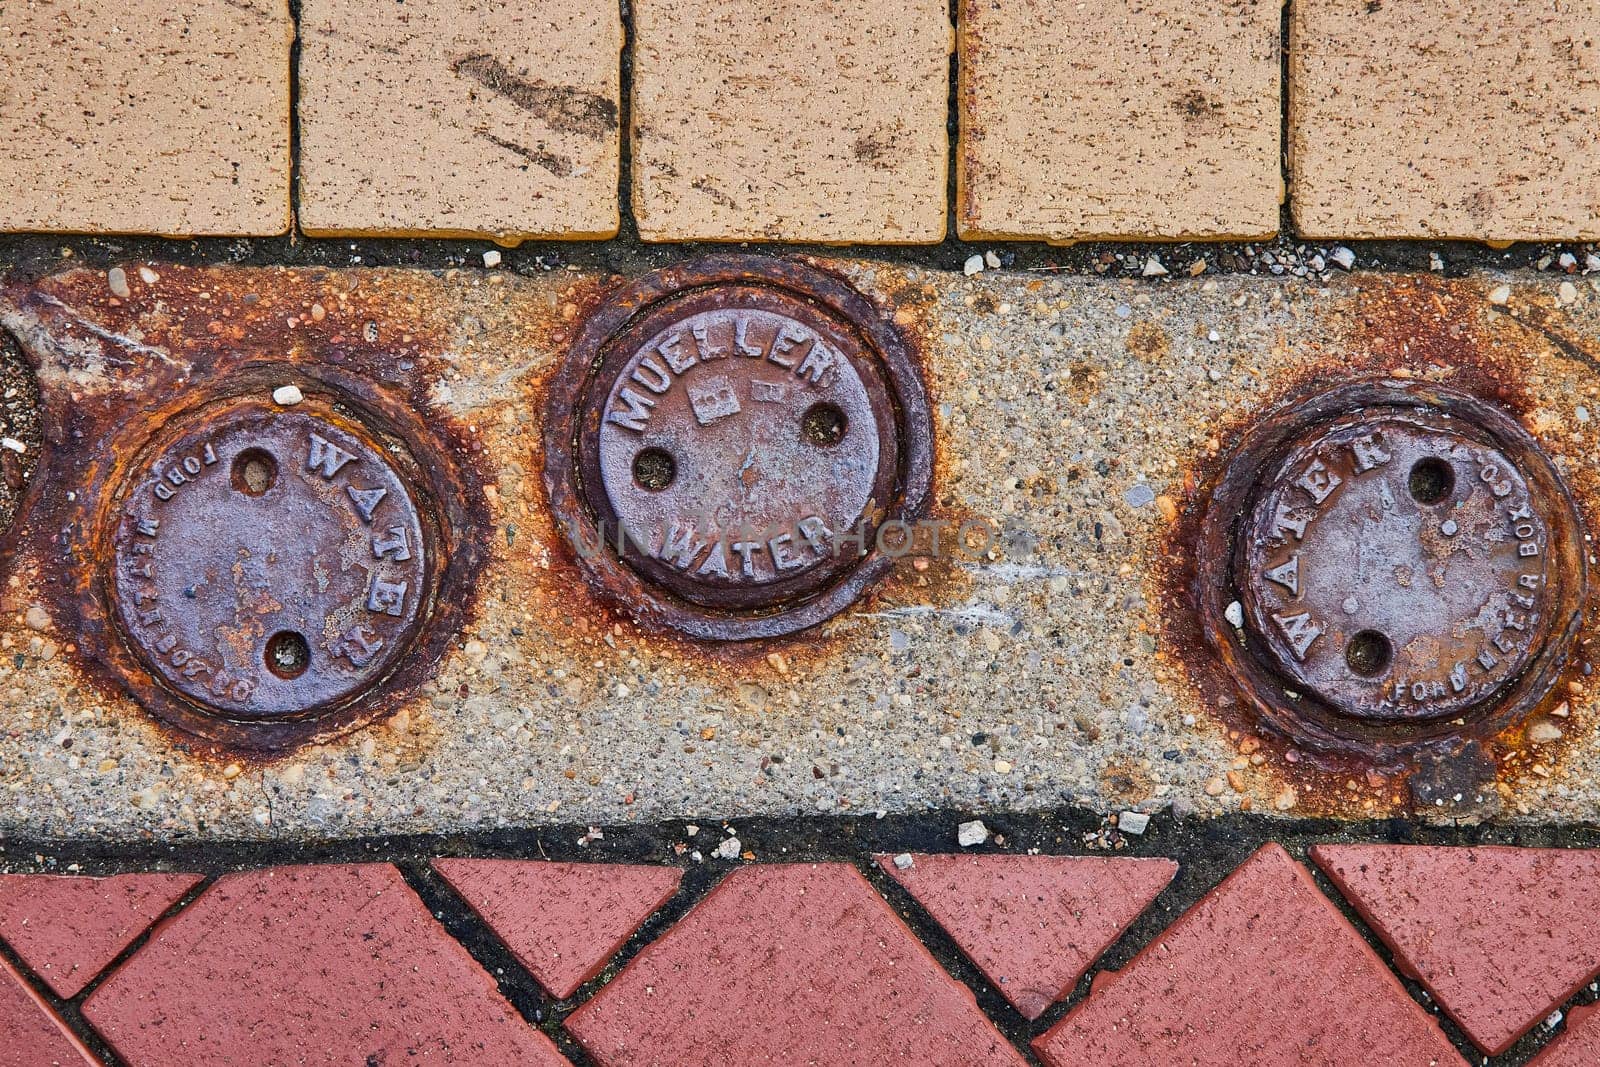 Rusty Mueller water utility covers amidst two-tone bricks in downtown Muncie, Indiana, showcasing urban decay and texture, 2023